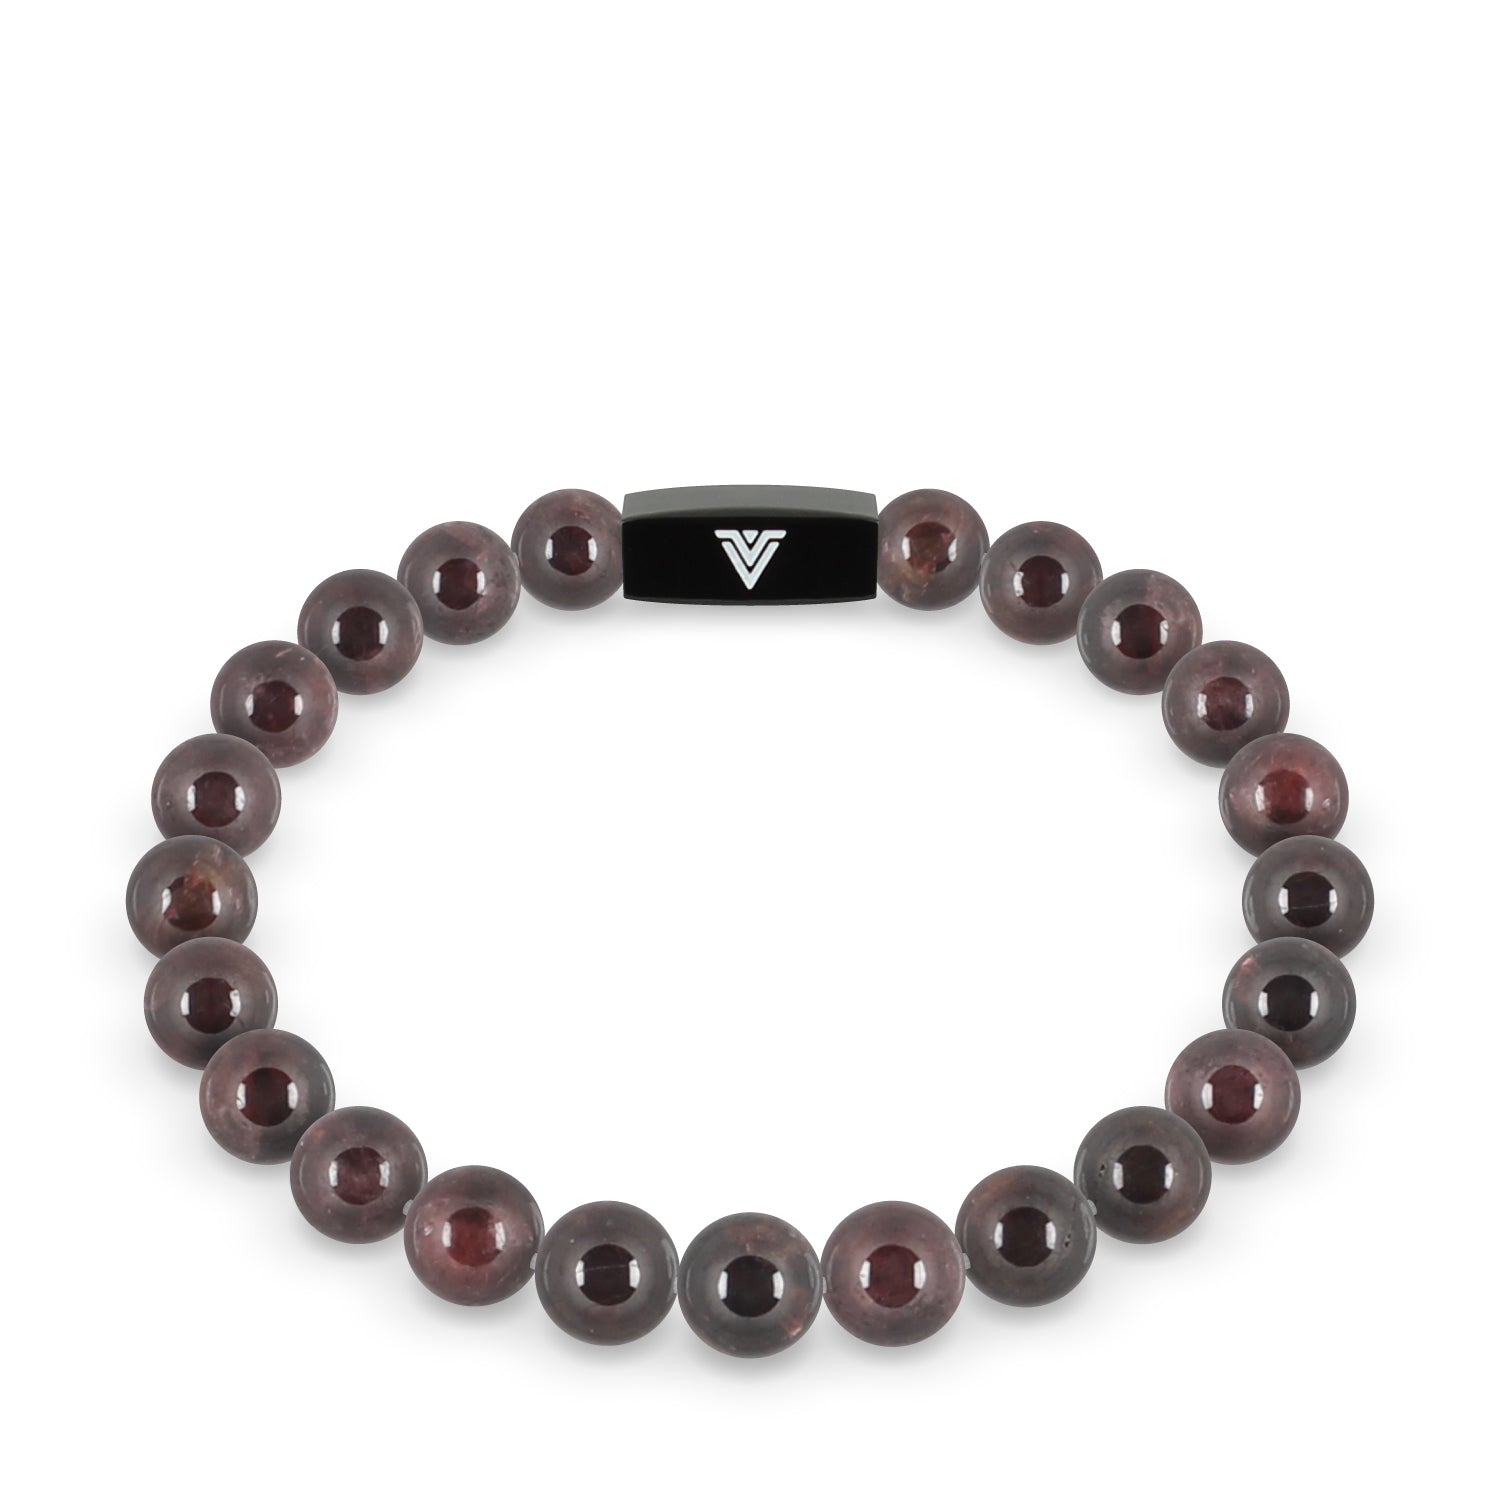 Front view of an 8mm Smooth Garnet crystal beaded stretch bracelet with black stainless steel logo bead made by Voltlin